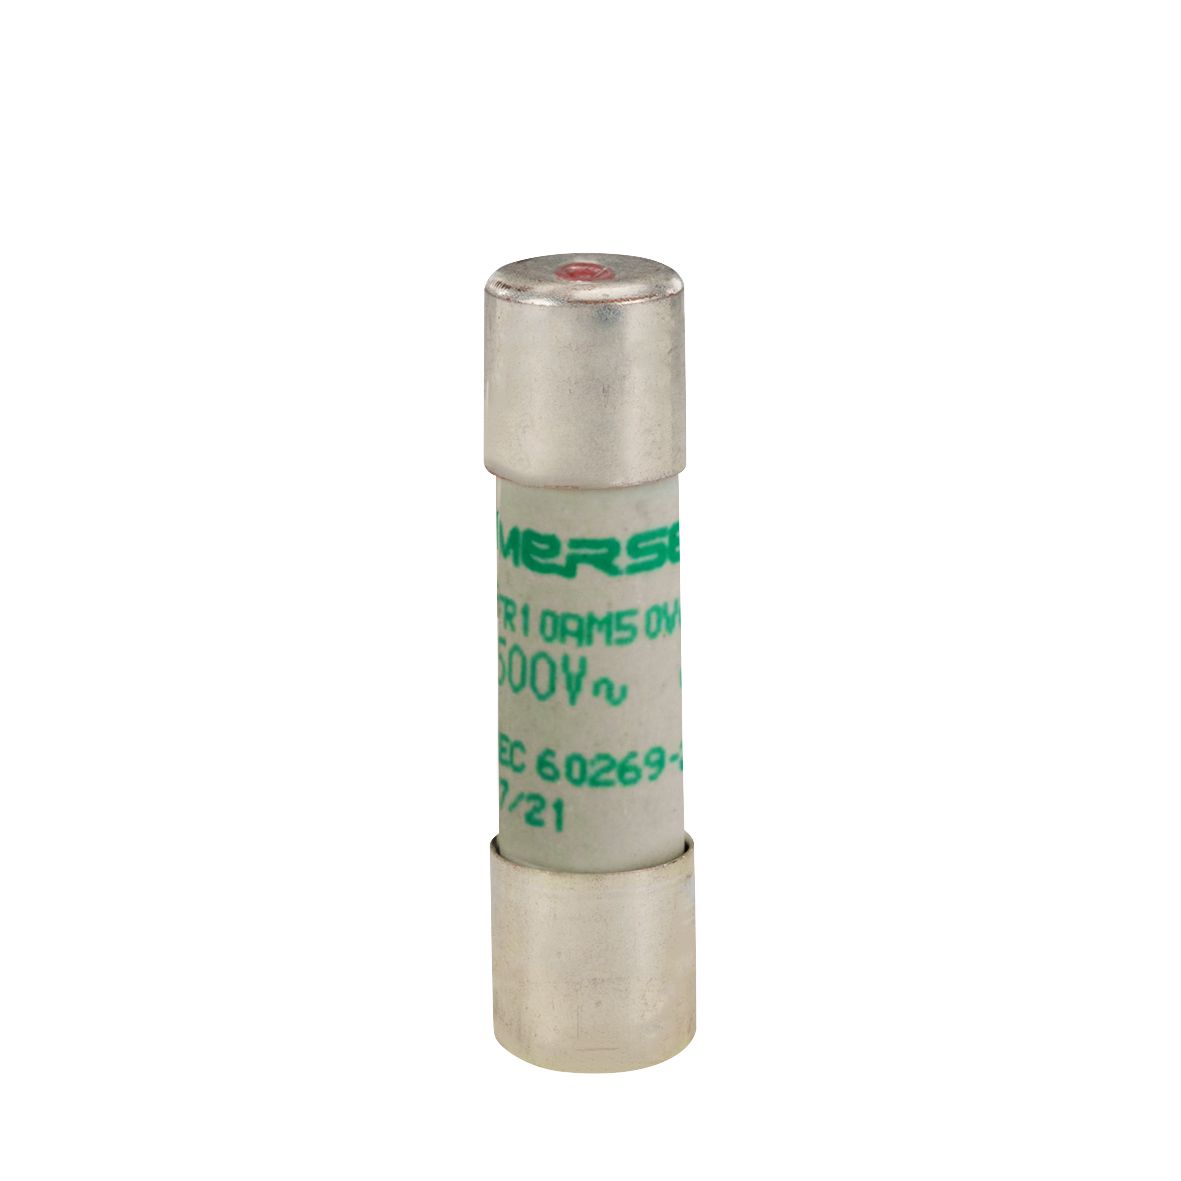 K201811 - Cylindrical fuse-link aM 500VAC 10.3x38, 6A with indicator